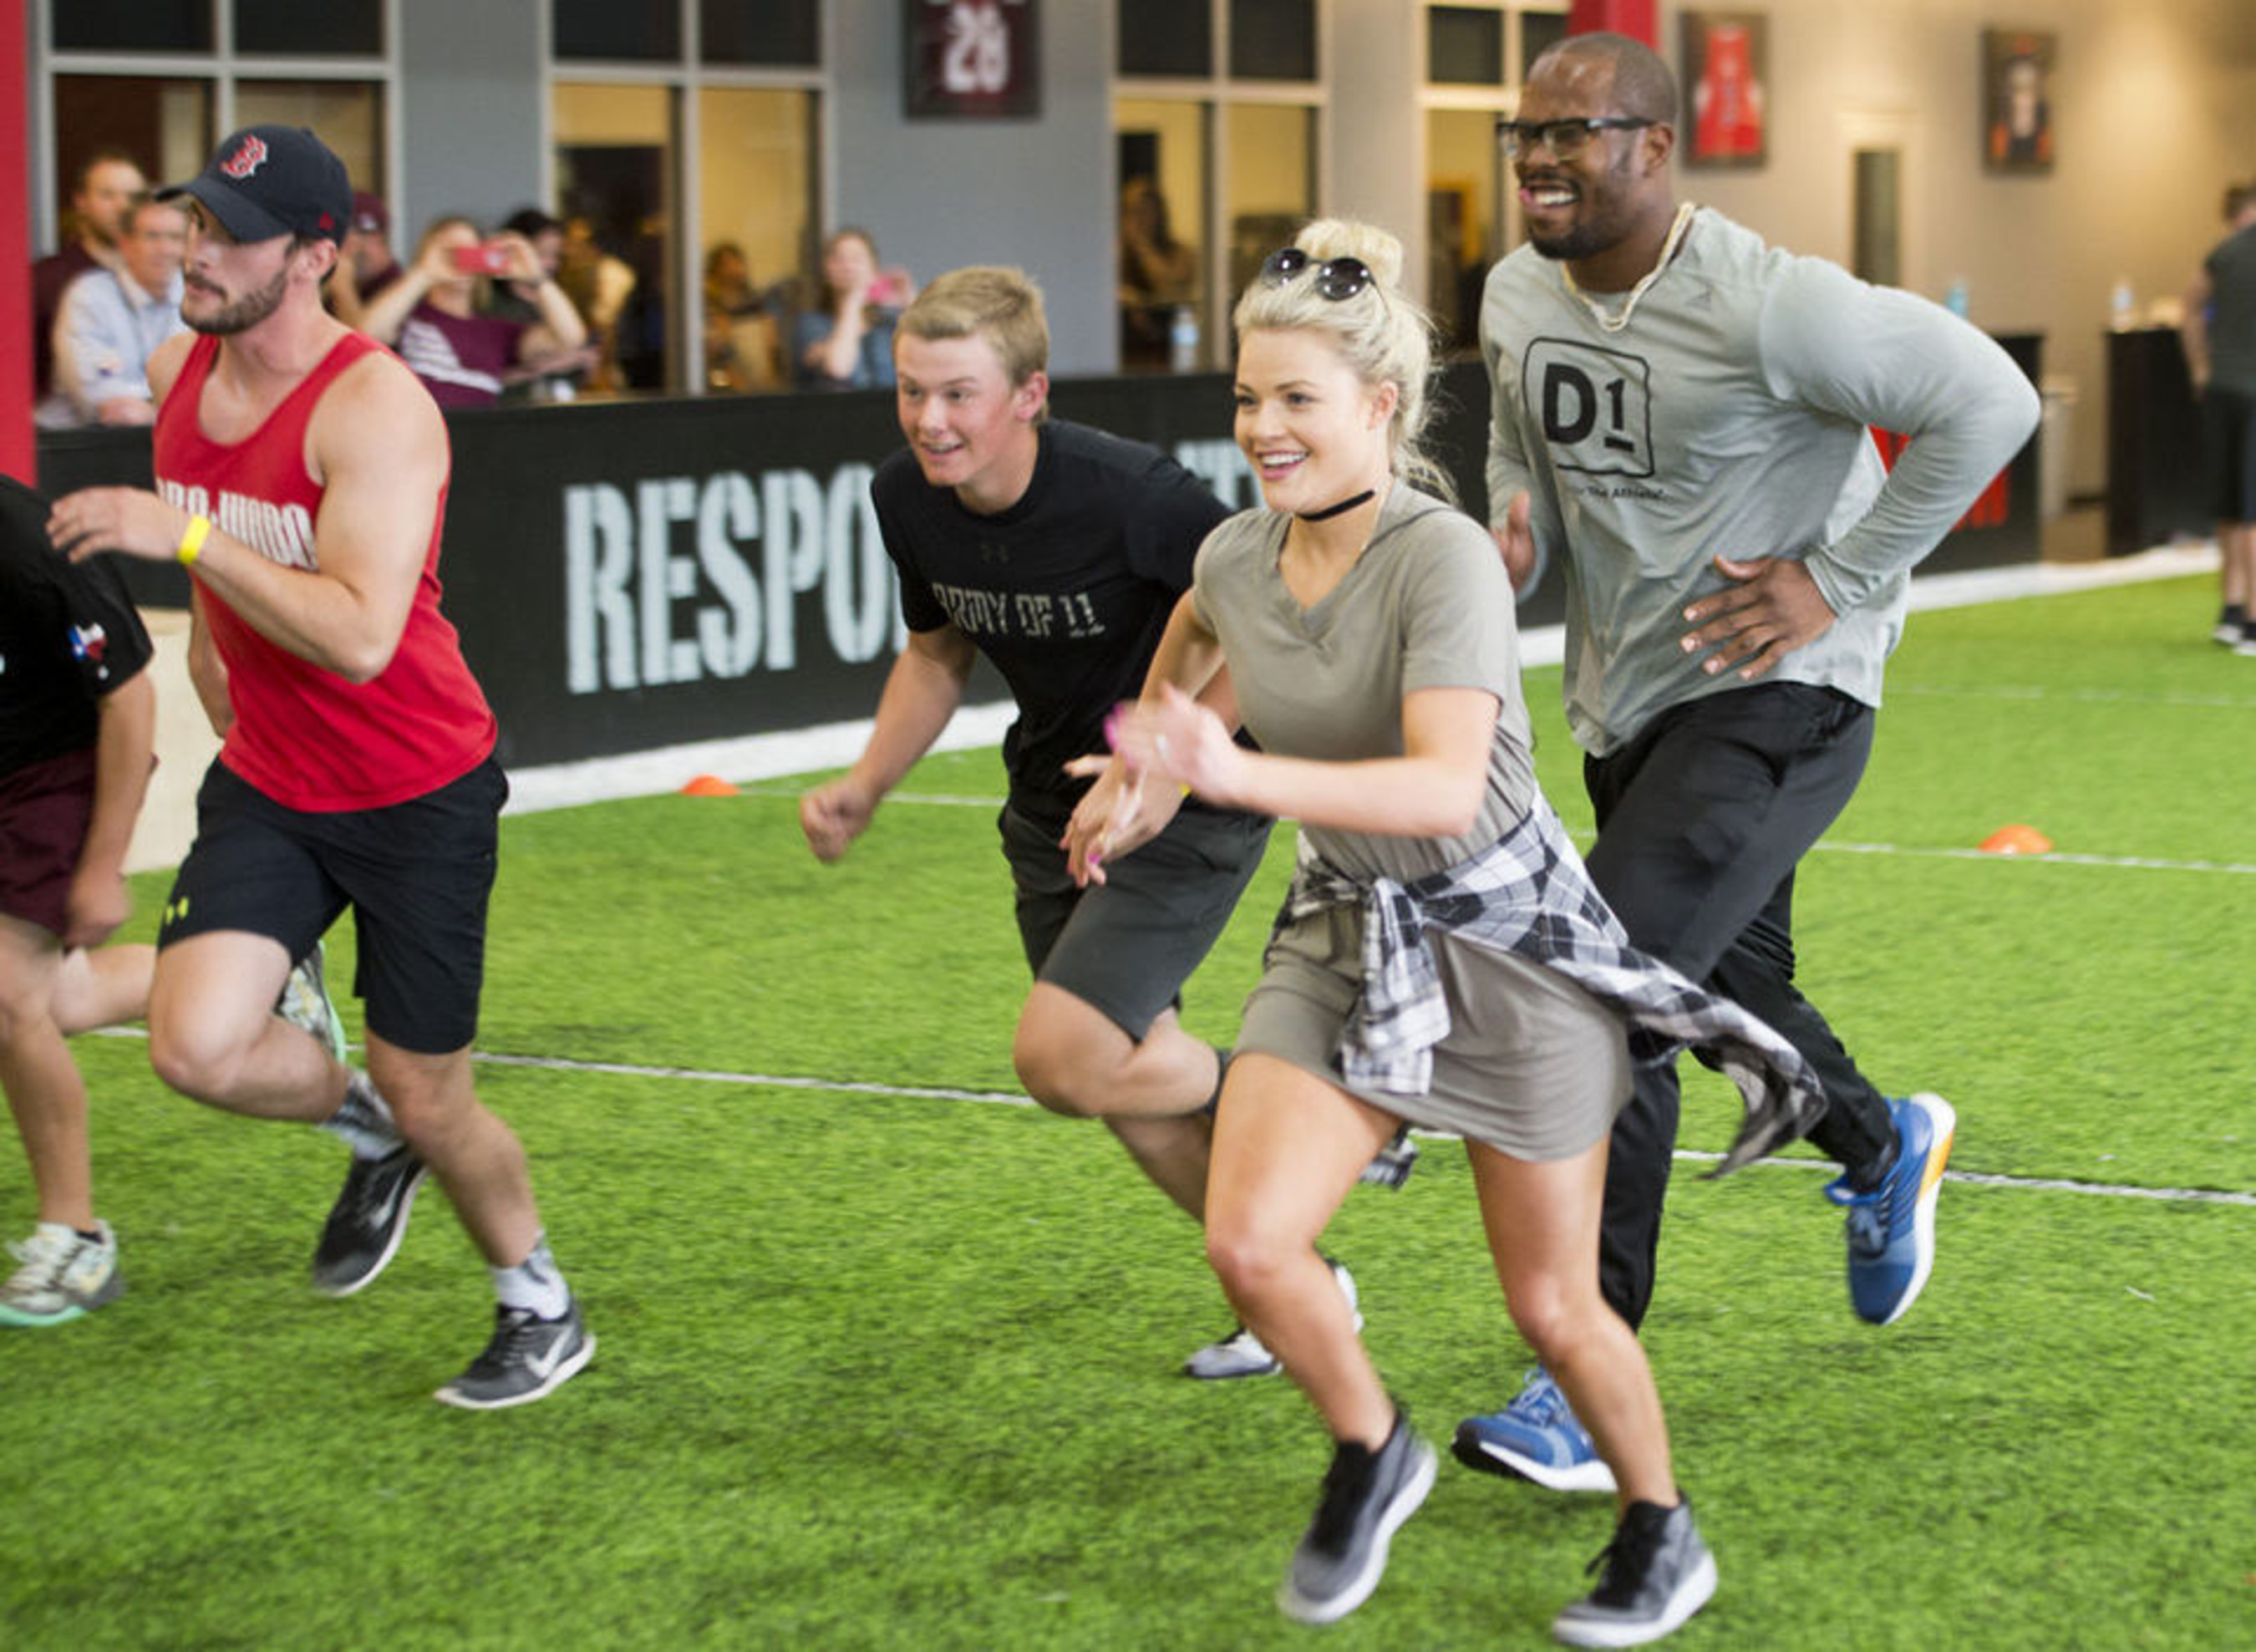 D1 Co-Owner Von Miller with former "Dancing With The Stars" partner Witney Carson and members at the D1 Athlete Experience in College Station.